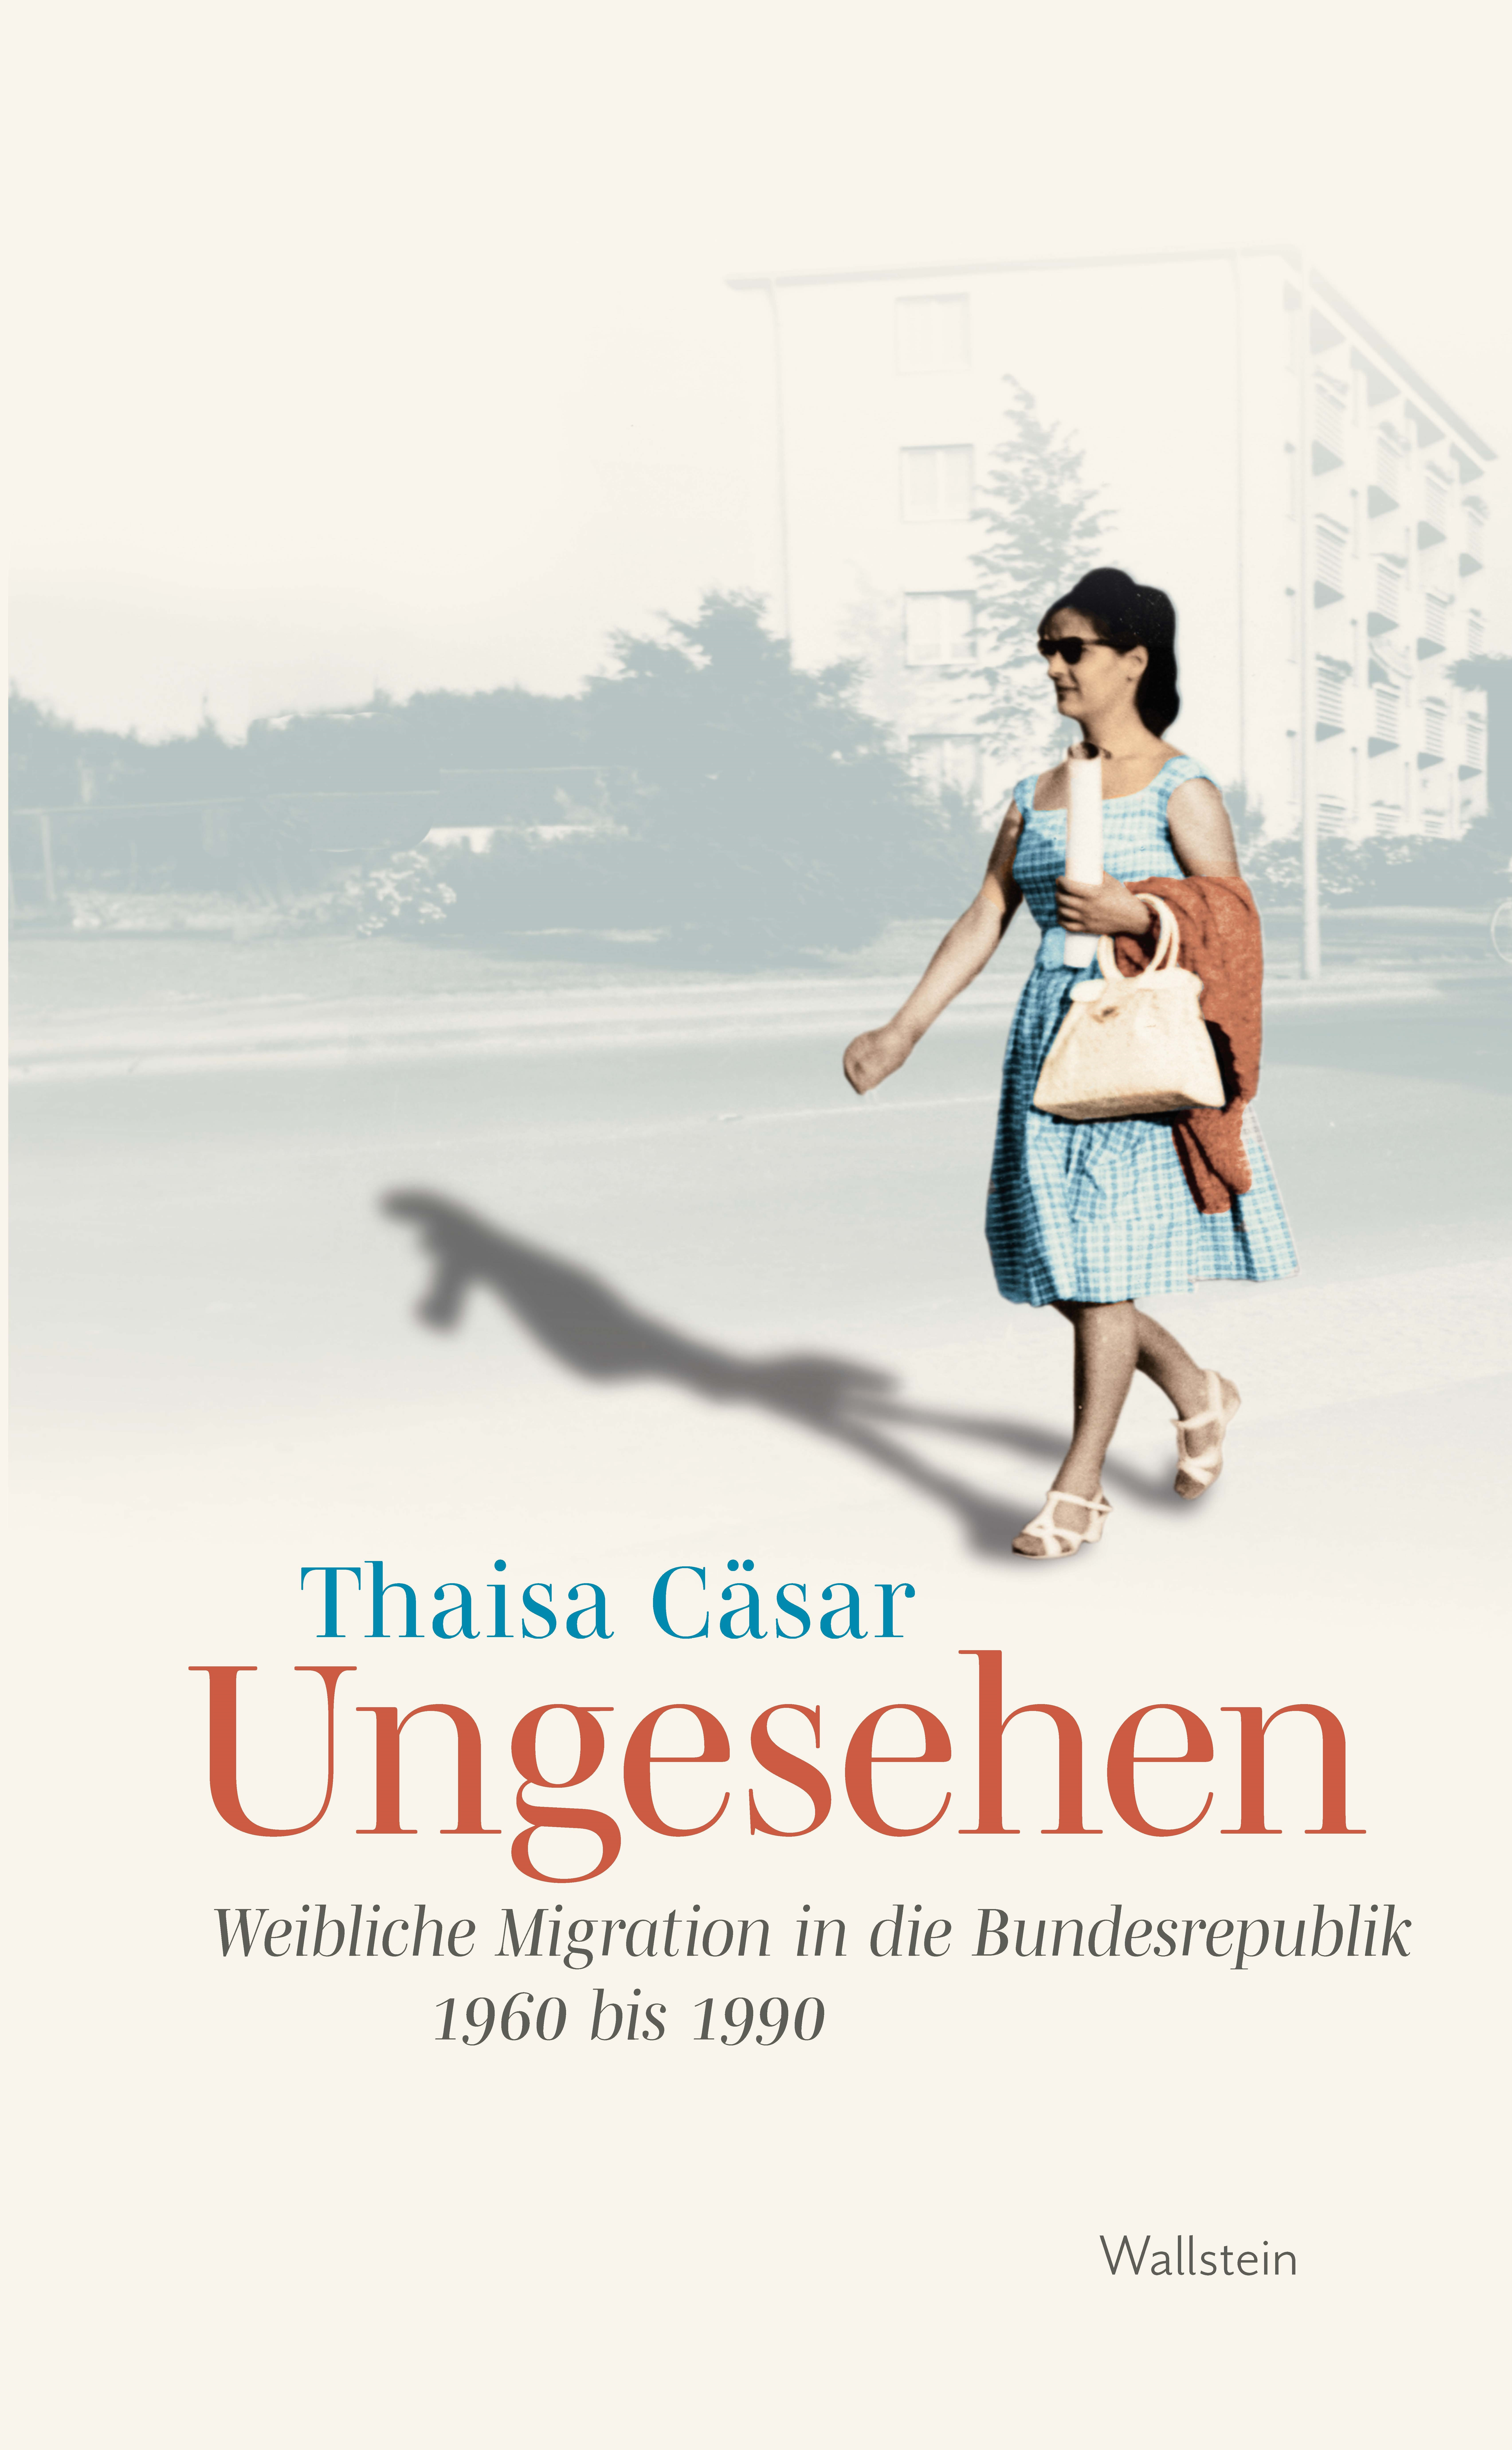 Title page of the book "Ungesehen. Female migration to the Federal Republic of Germany, 1960 to 1990" by Thaisa Cäsar